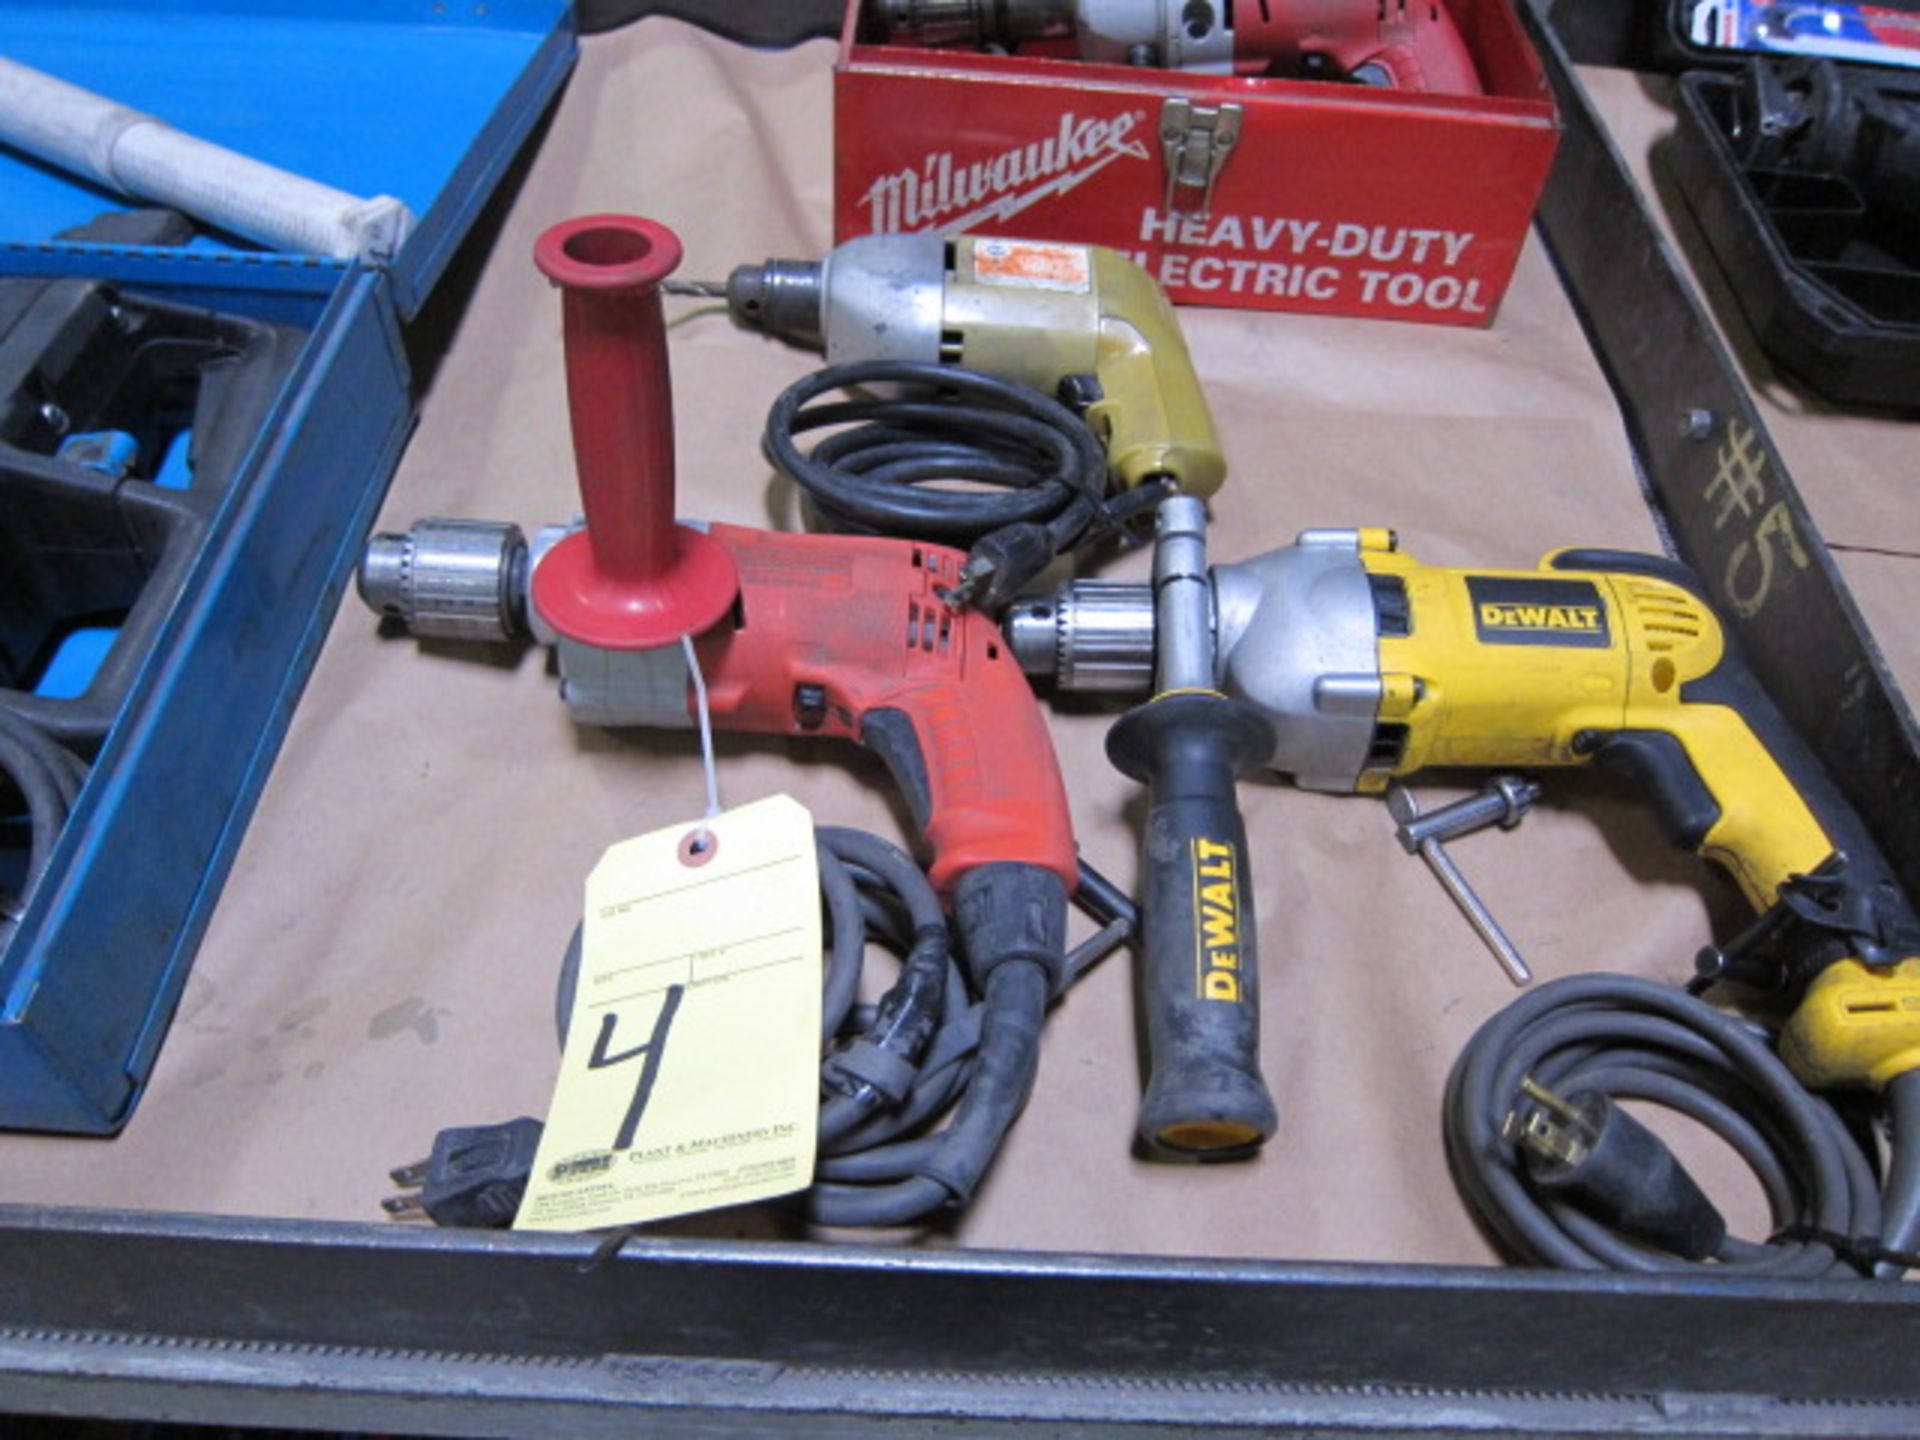 LOT OF ELECTRIC DRILLS (3), assorted